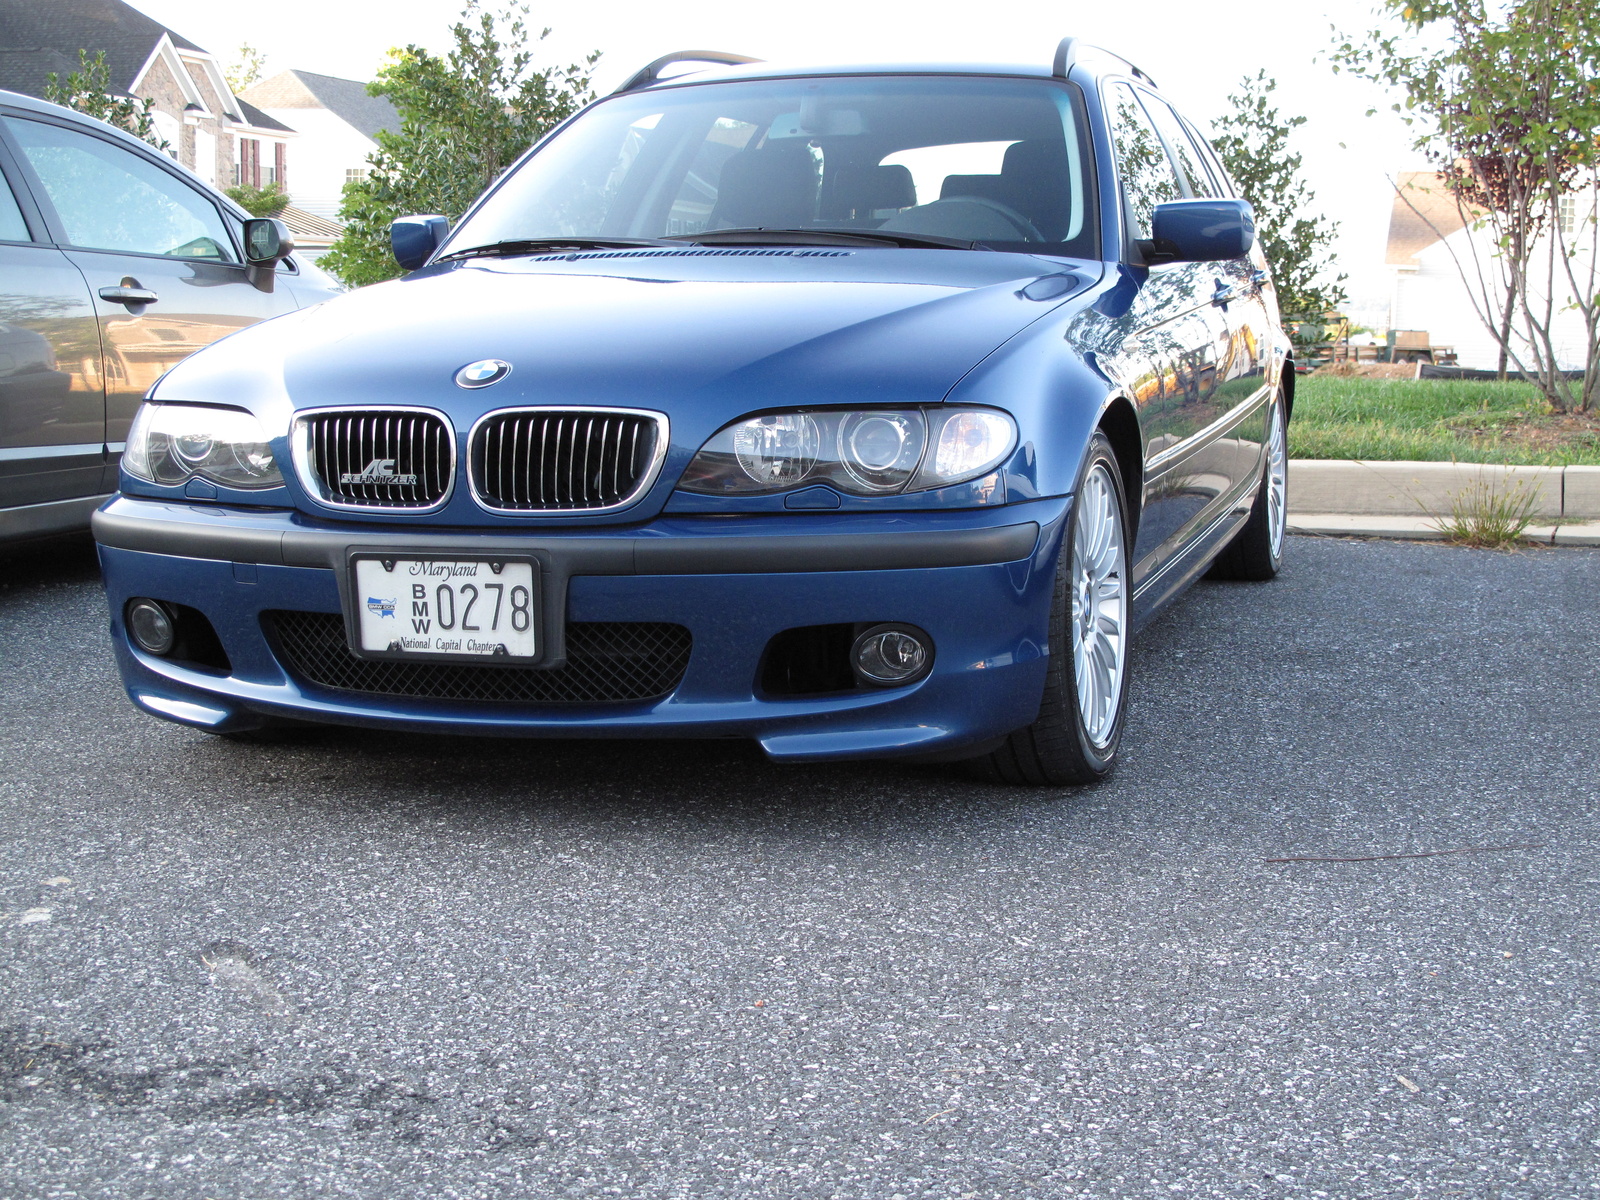 2002 Bmw 325xi safety rating #6